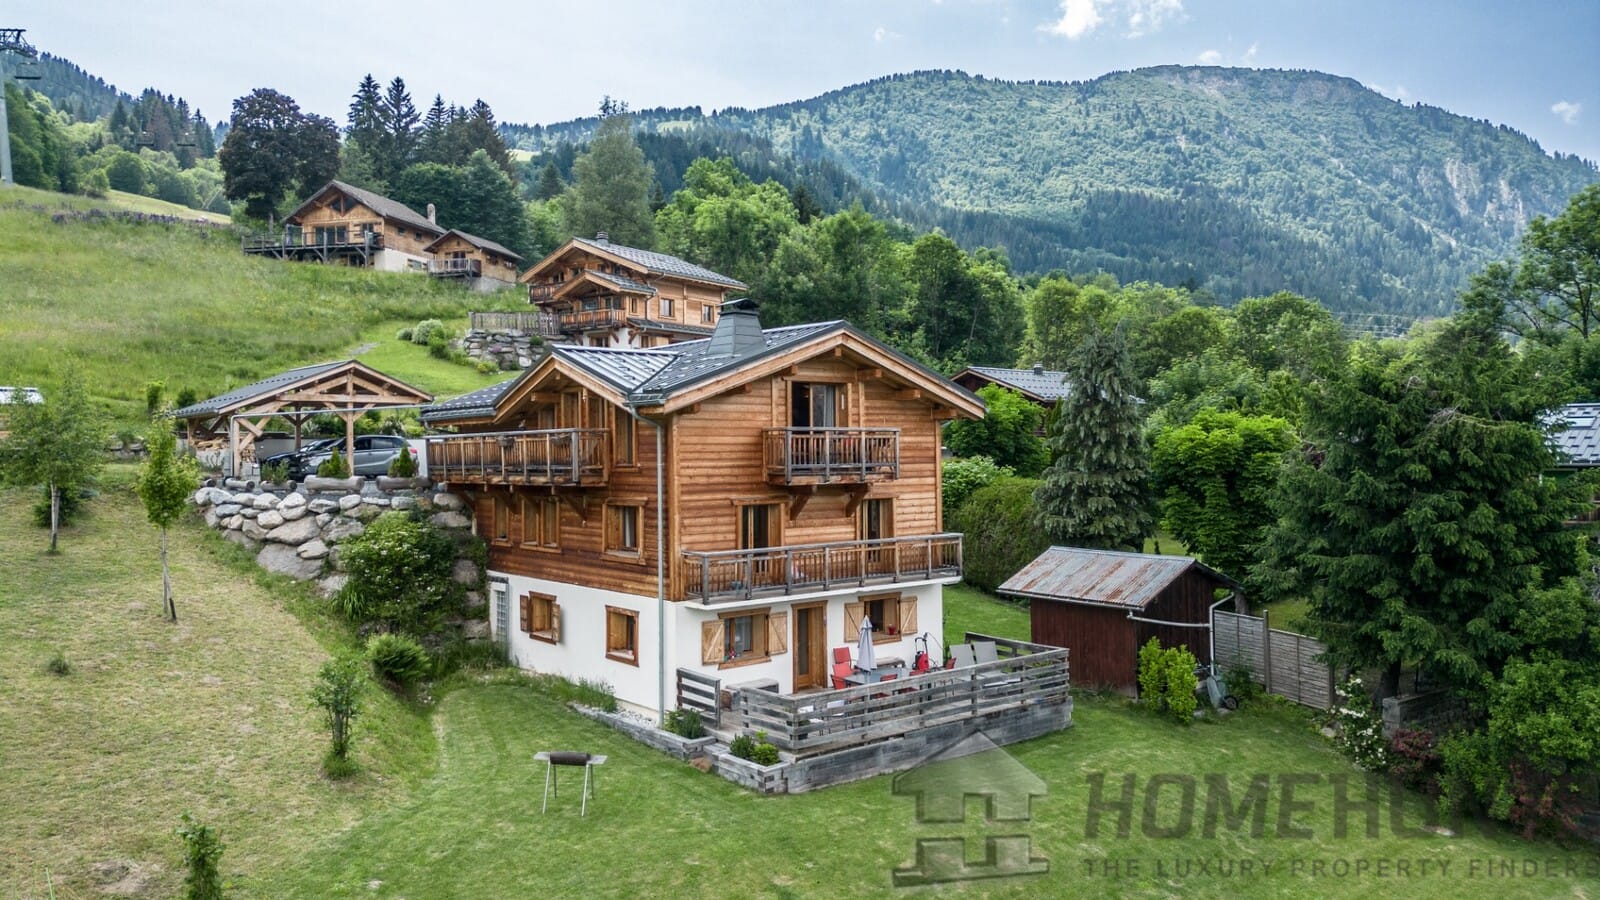 Villa/House For Sale in Les Houches 16